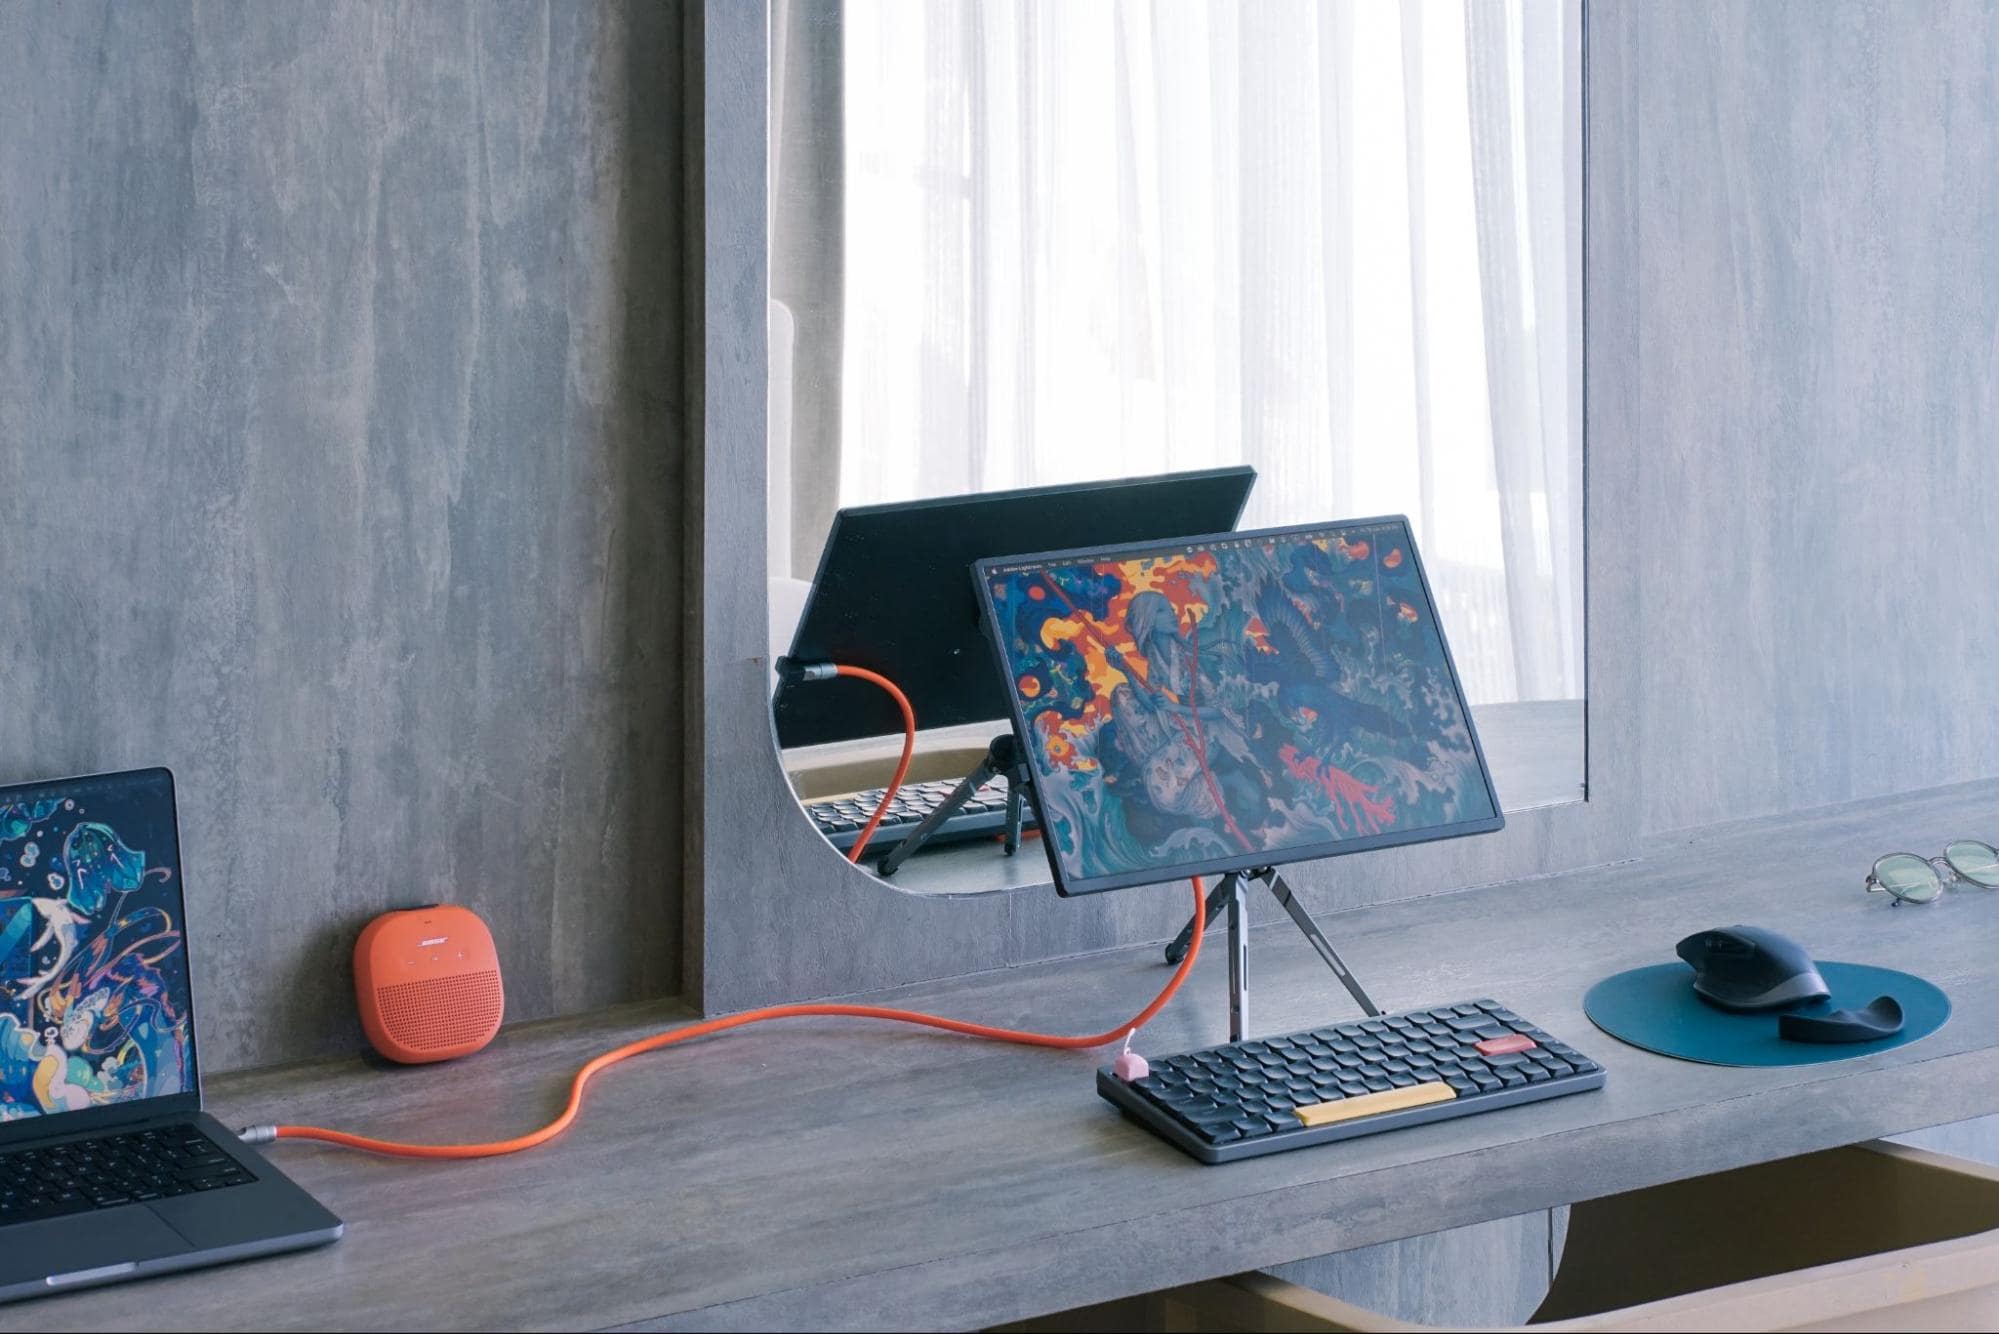 A minimalist desk setup in Tokyo with a laptop, a tablet on a stand, a mechanical keyboard, and a portable speaker, all connected by a striking orange cable